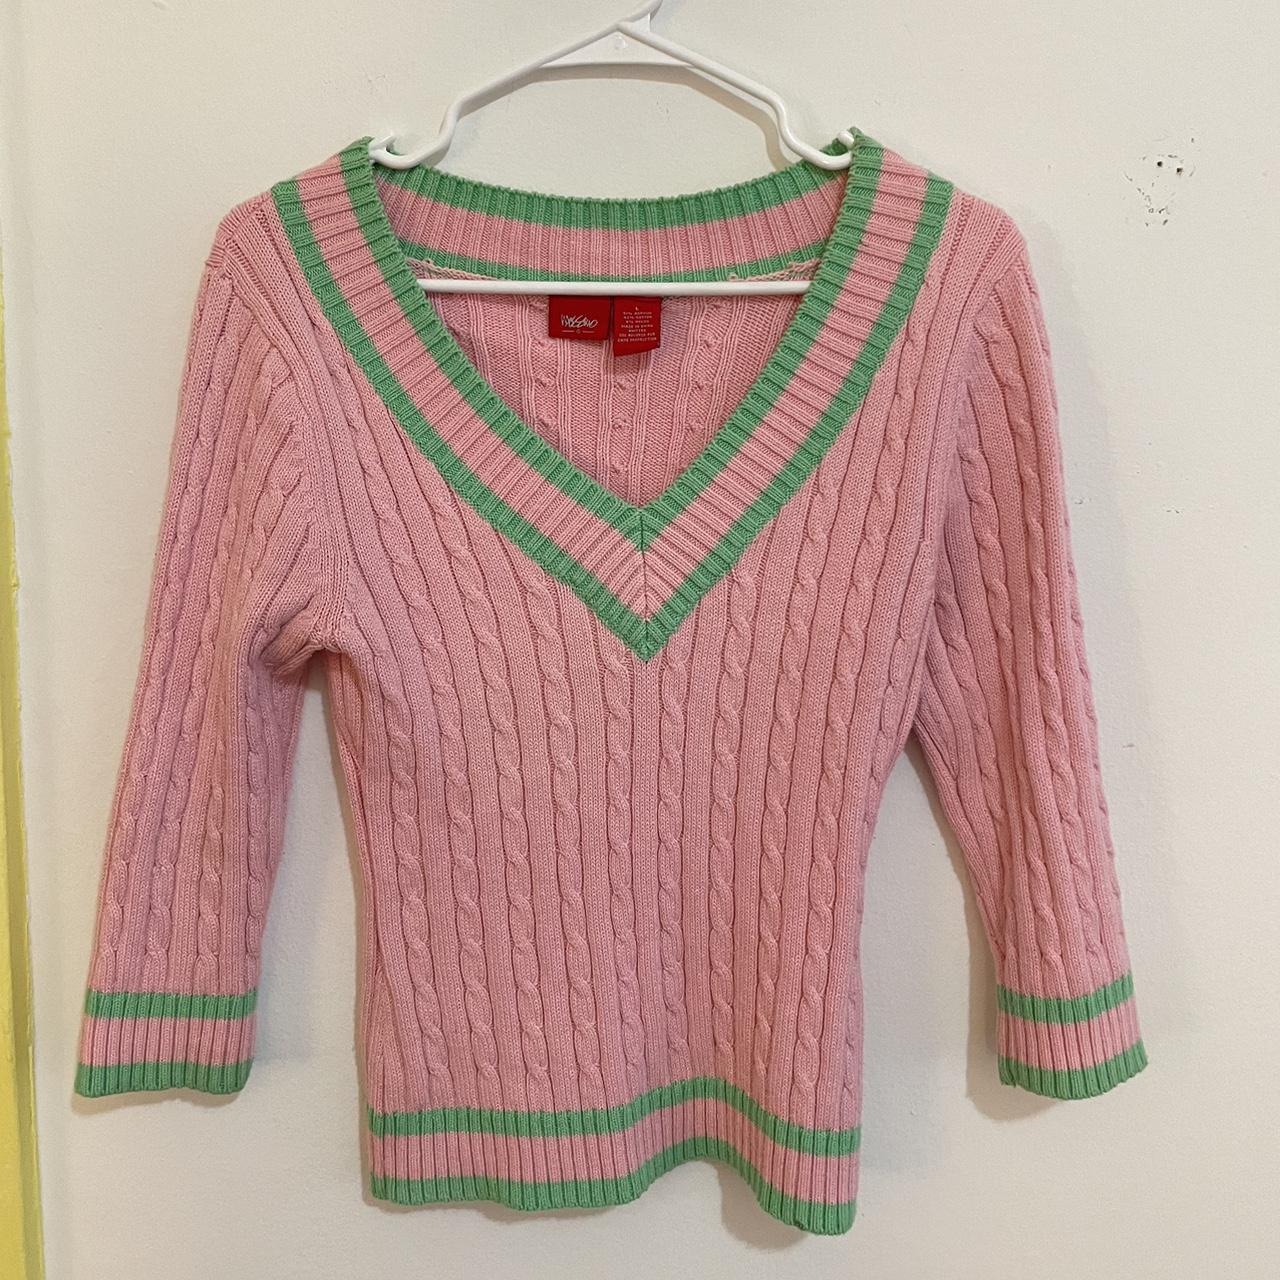 Mossimo Women's Pink and Green Jumper | Depop